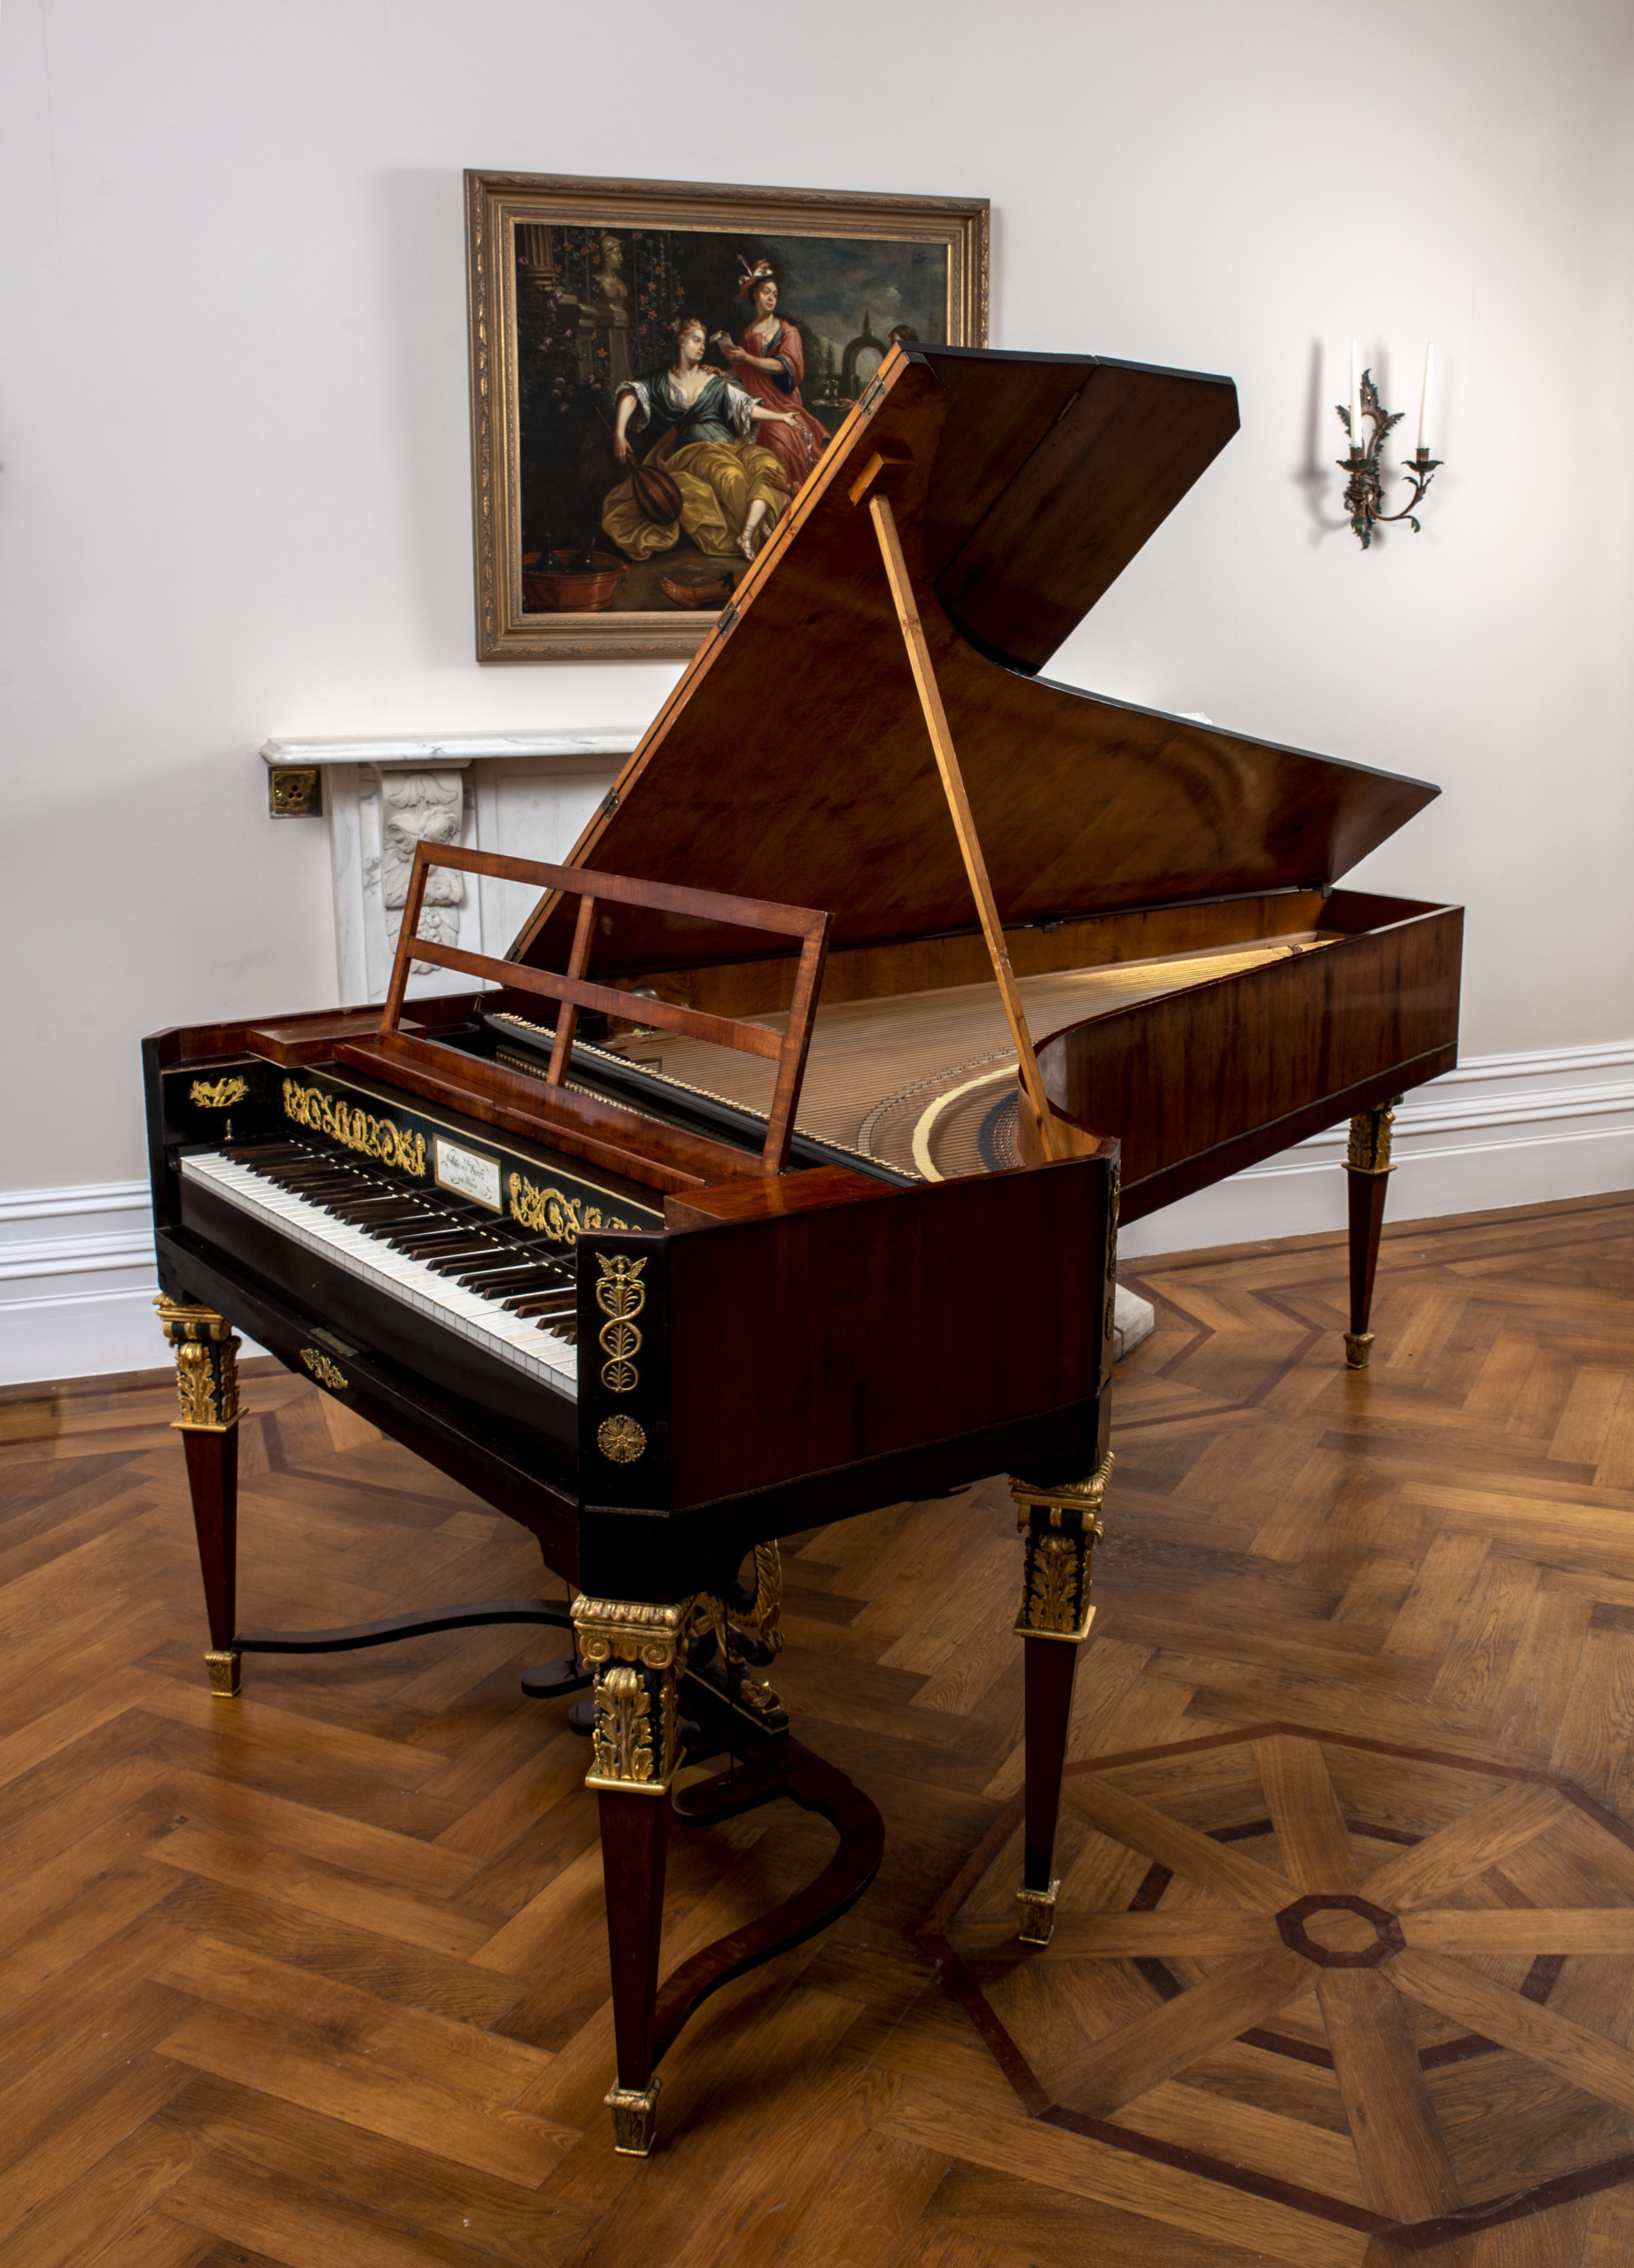 Fortepiano: Early Nineteenth-Century Compositions, Ludwig Van Beethoven, Wolfgang Amadeus Mozart, The Classical Era Of Music. 1850x2560 HD Wallpaper.